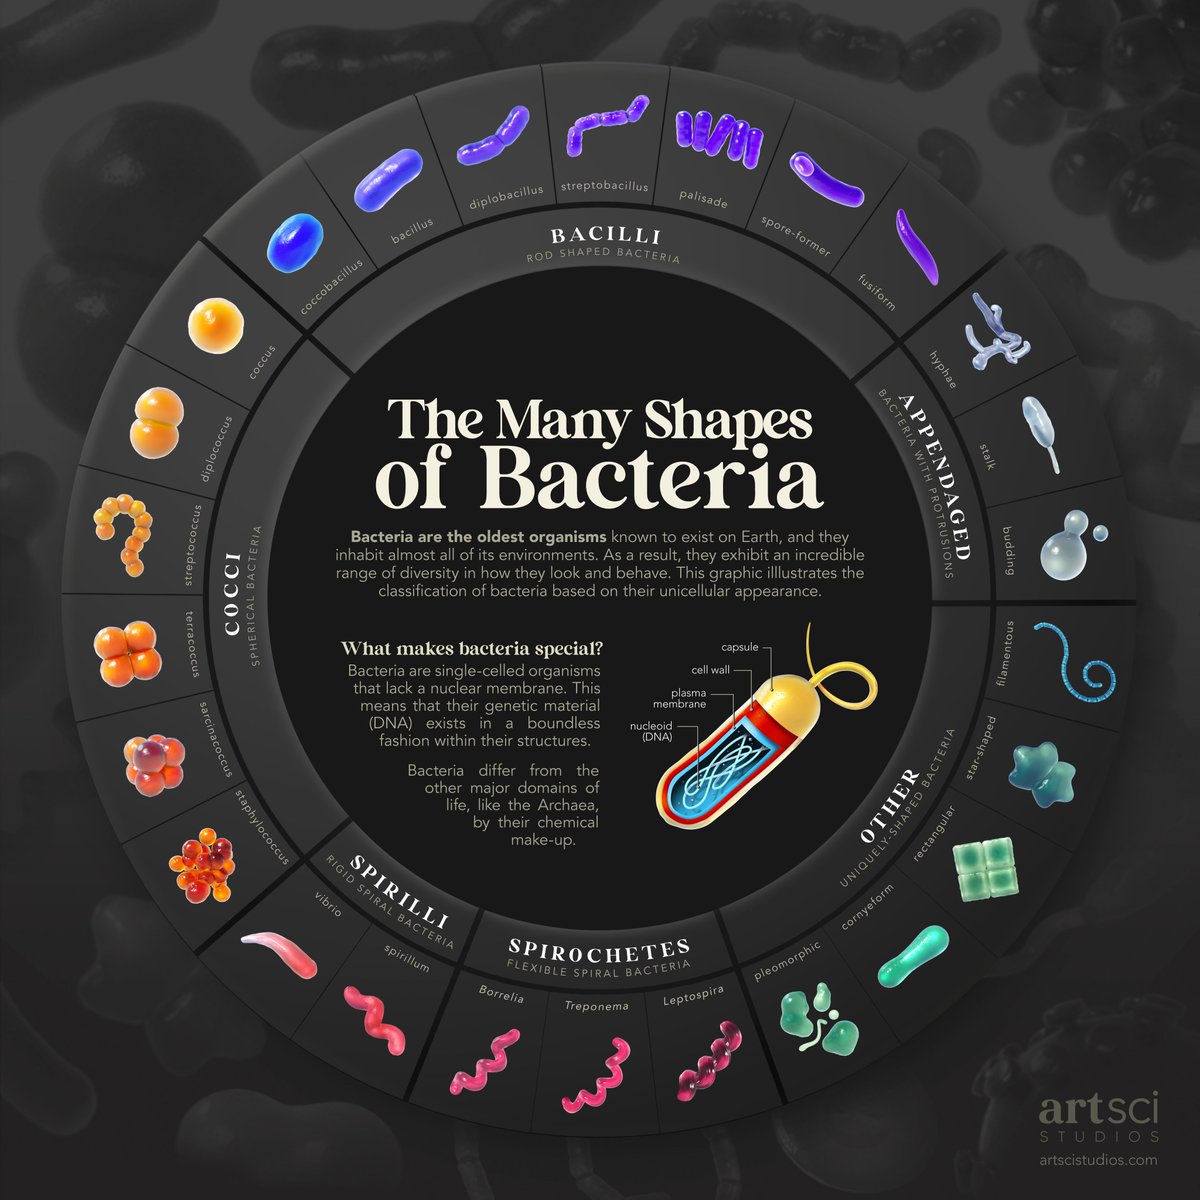 The Many Shapes of Bacteria #Bacteria #Infographic #science #art #microbes #microbiology #sciart #vizscicomm #scicomm